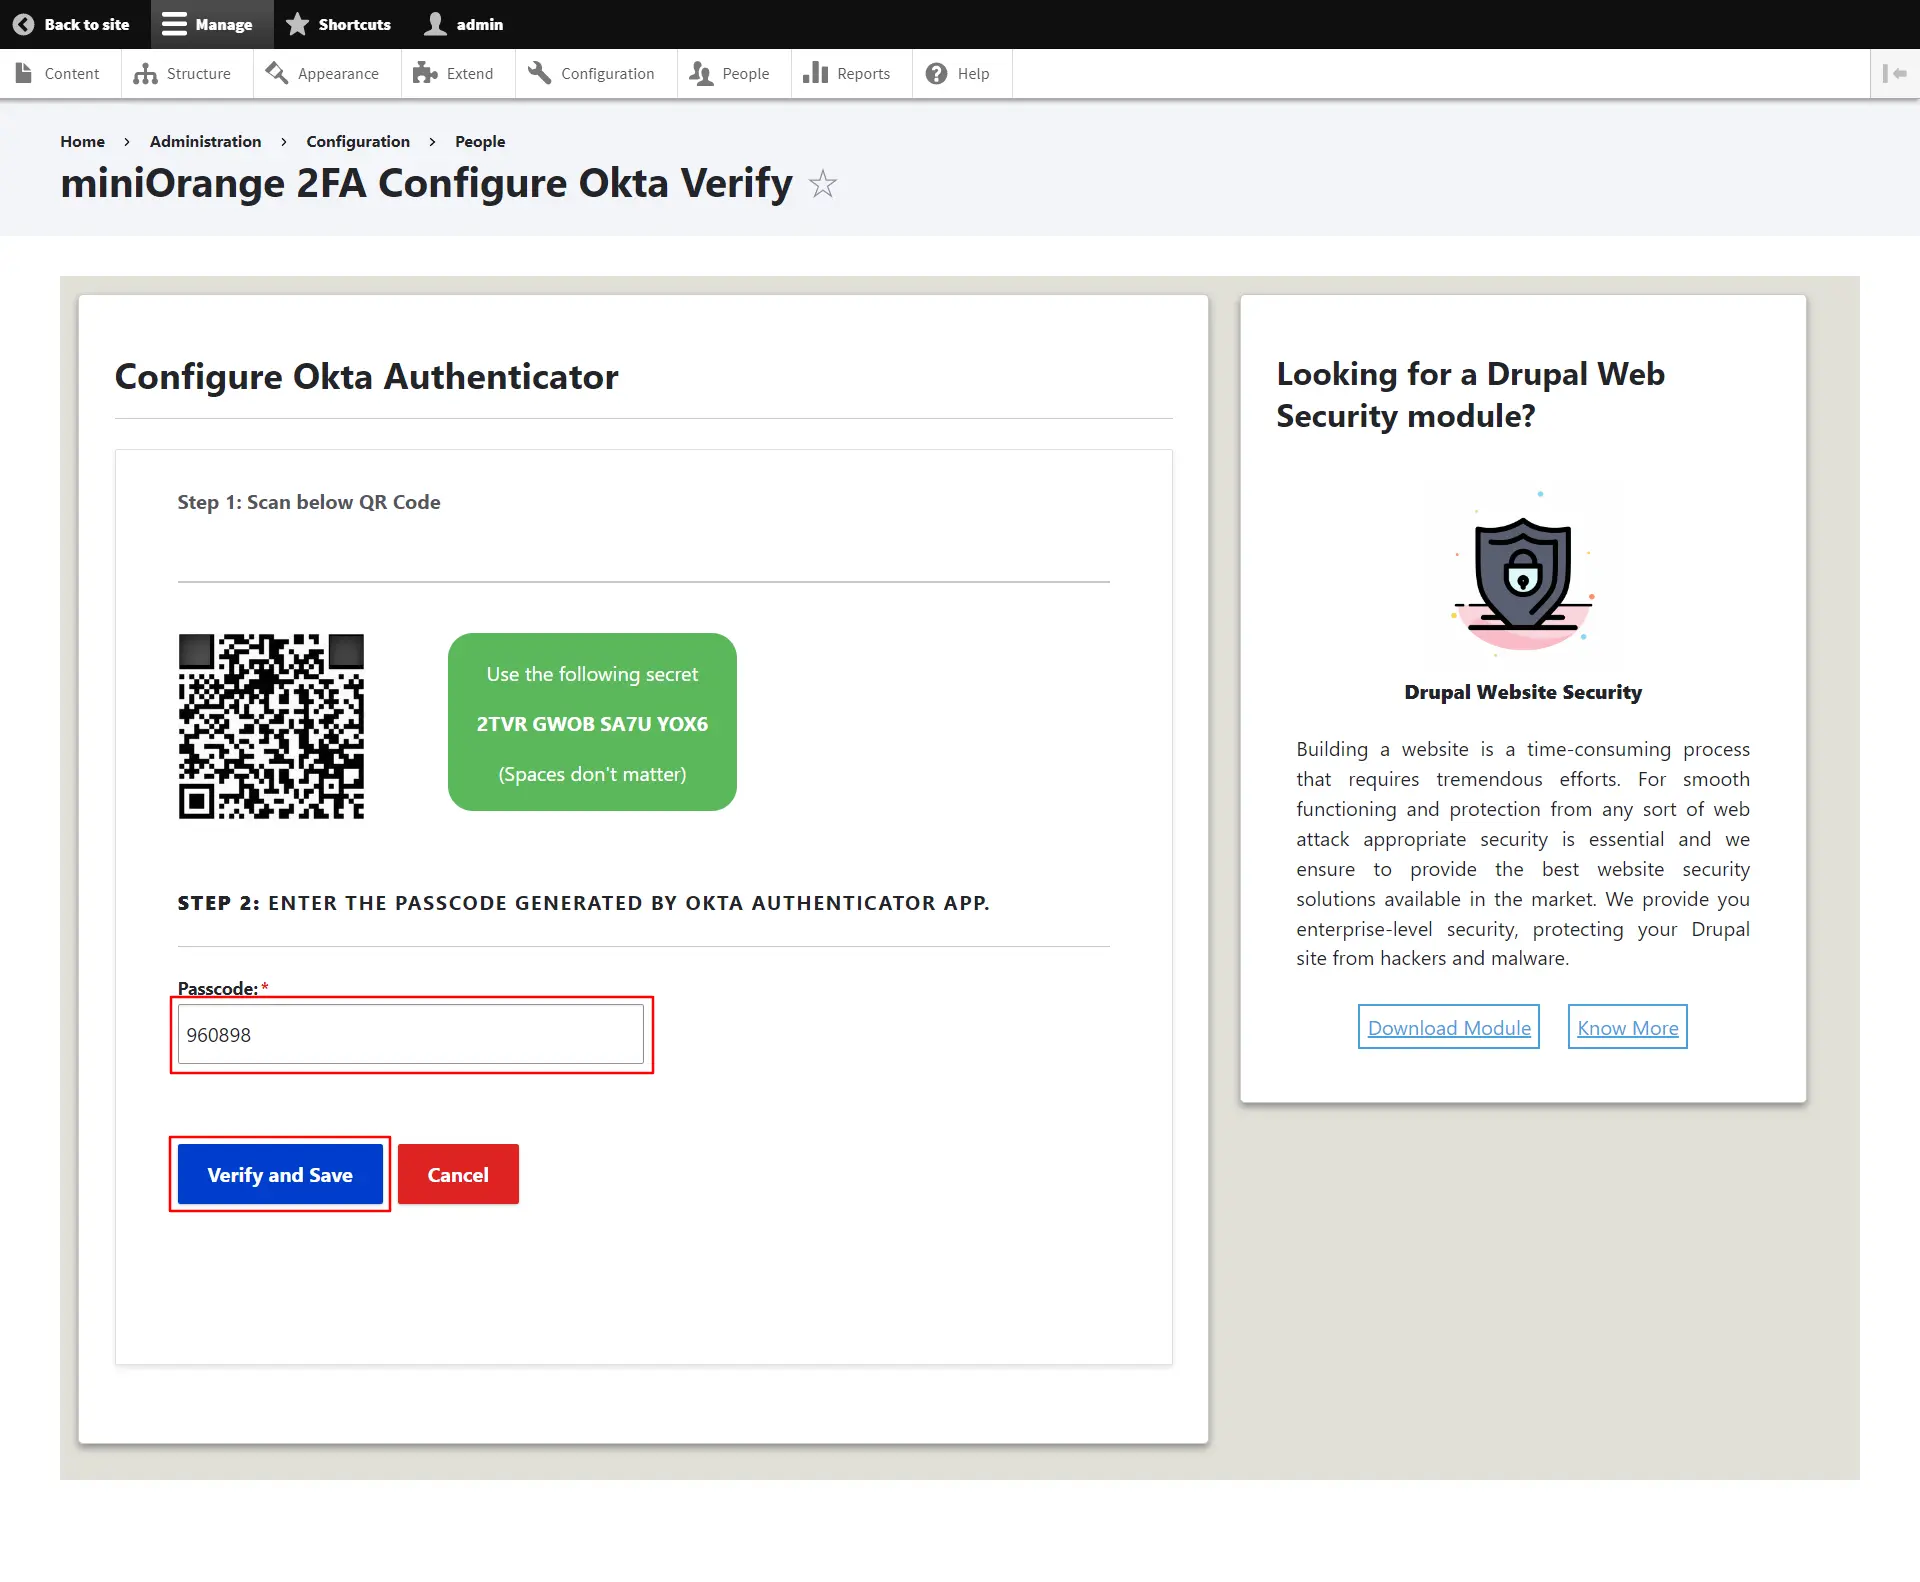 Drupal 2FA - Enter the Generated Passcode in Okta verify authenticator app